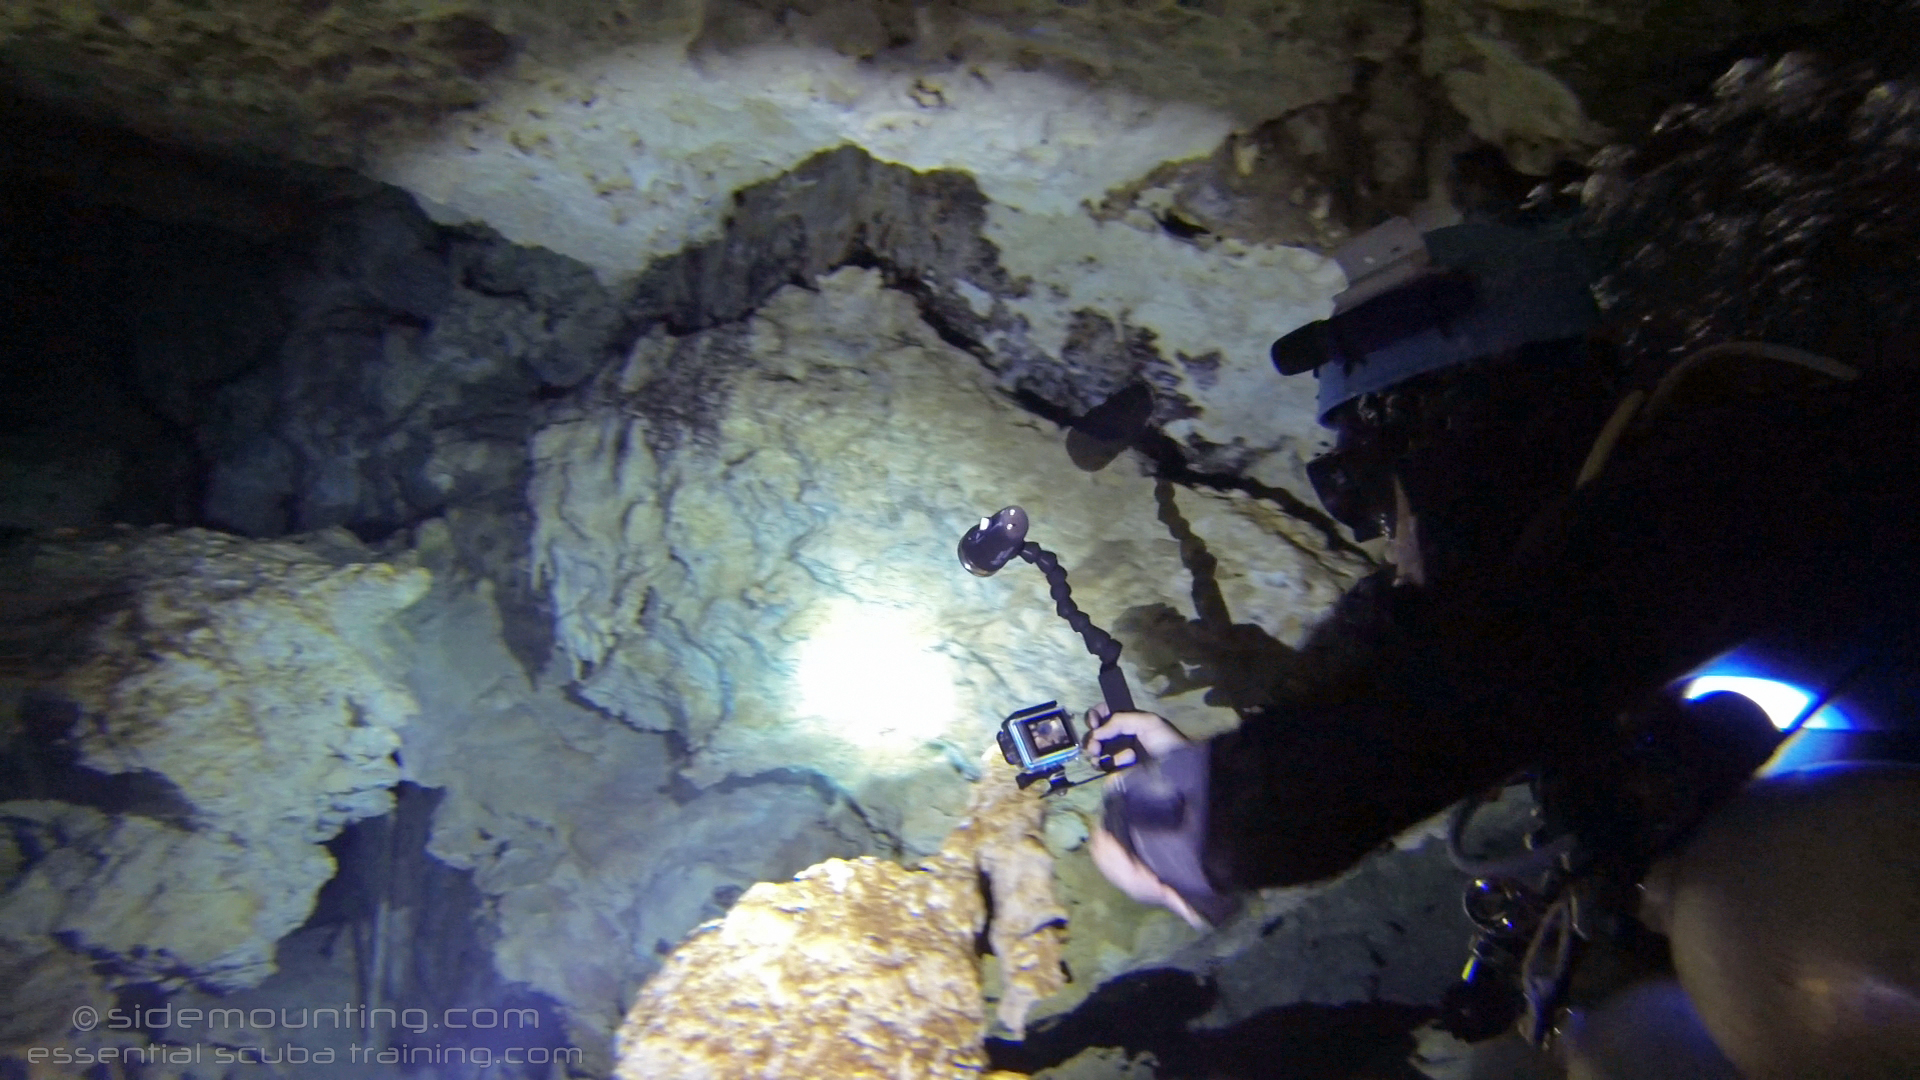 This is another way to mount your GoPro for cave diving with Steve Martin